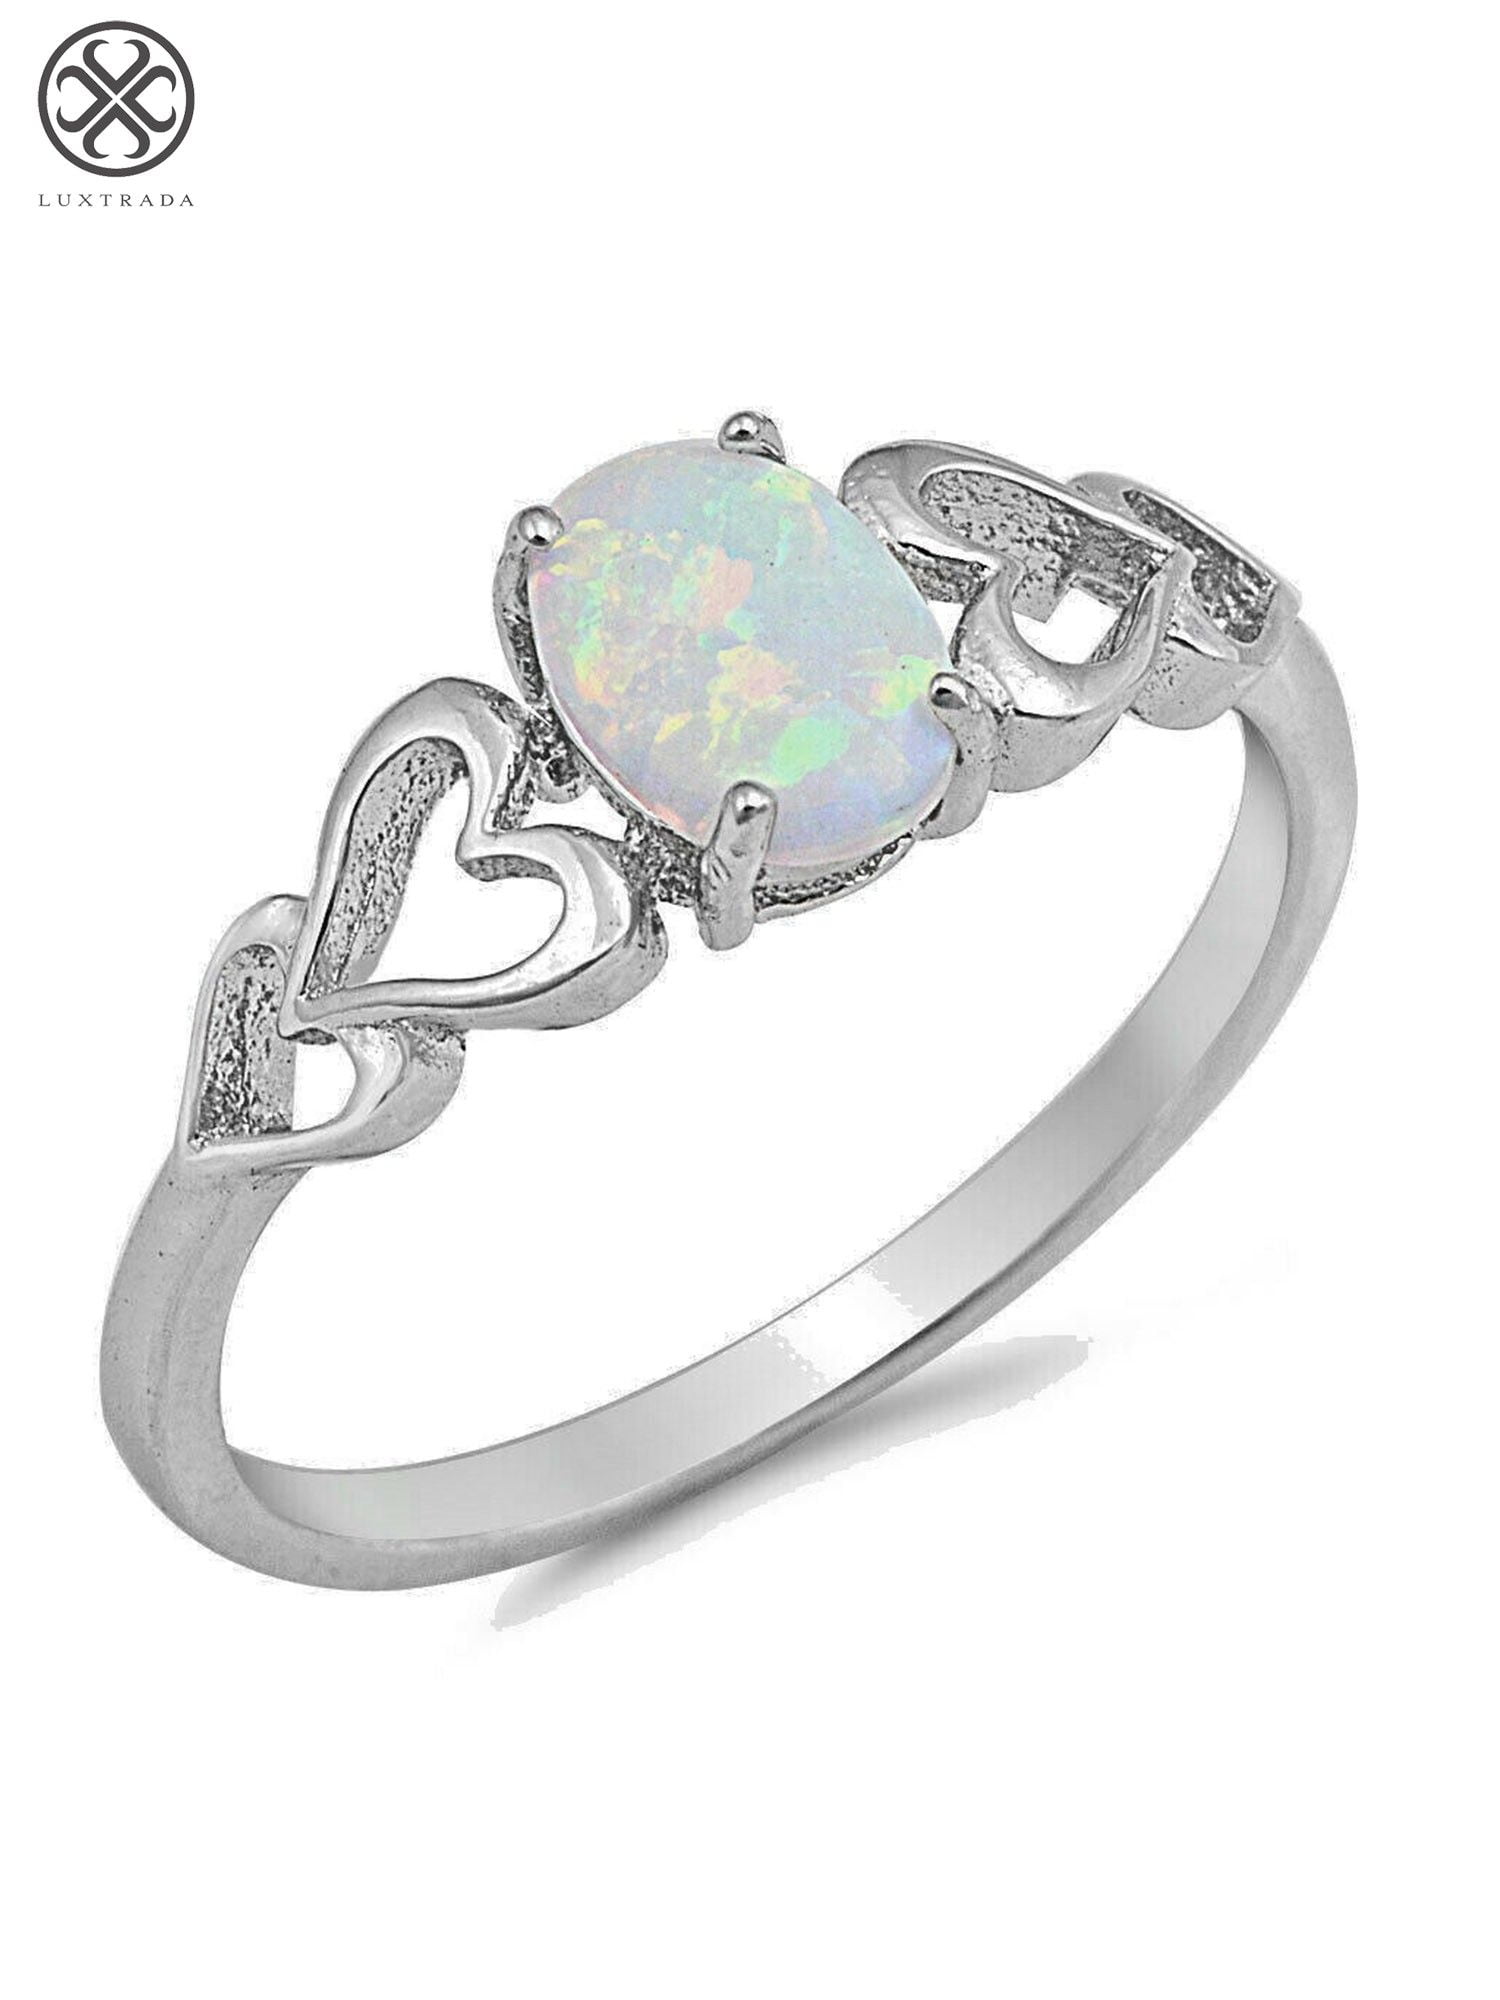 5.00tcw Radiant Rainbow Topaz 925 Sterling Silver 3-Stone Engagement Ring Sz 8 